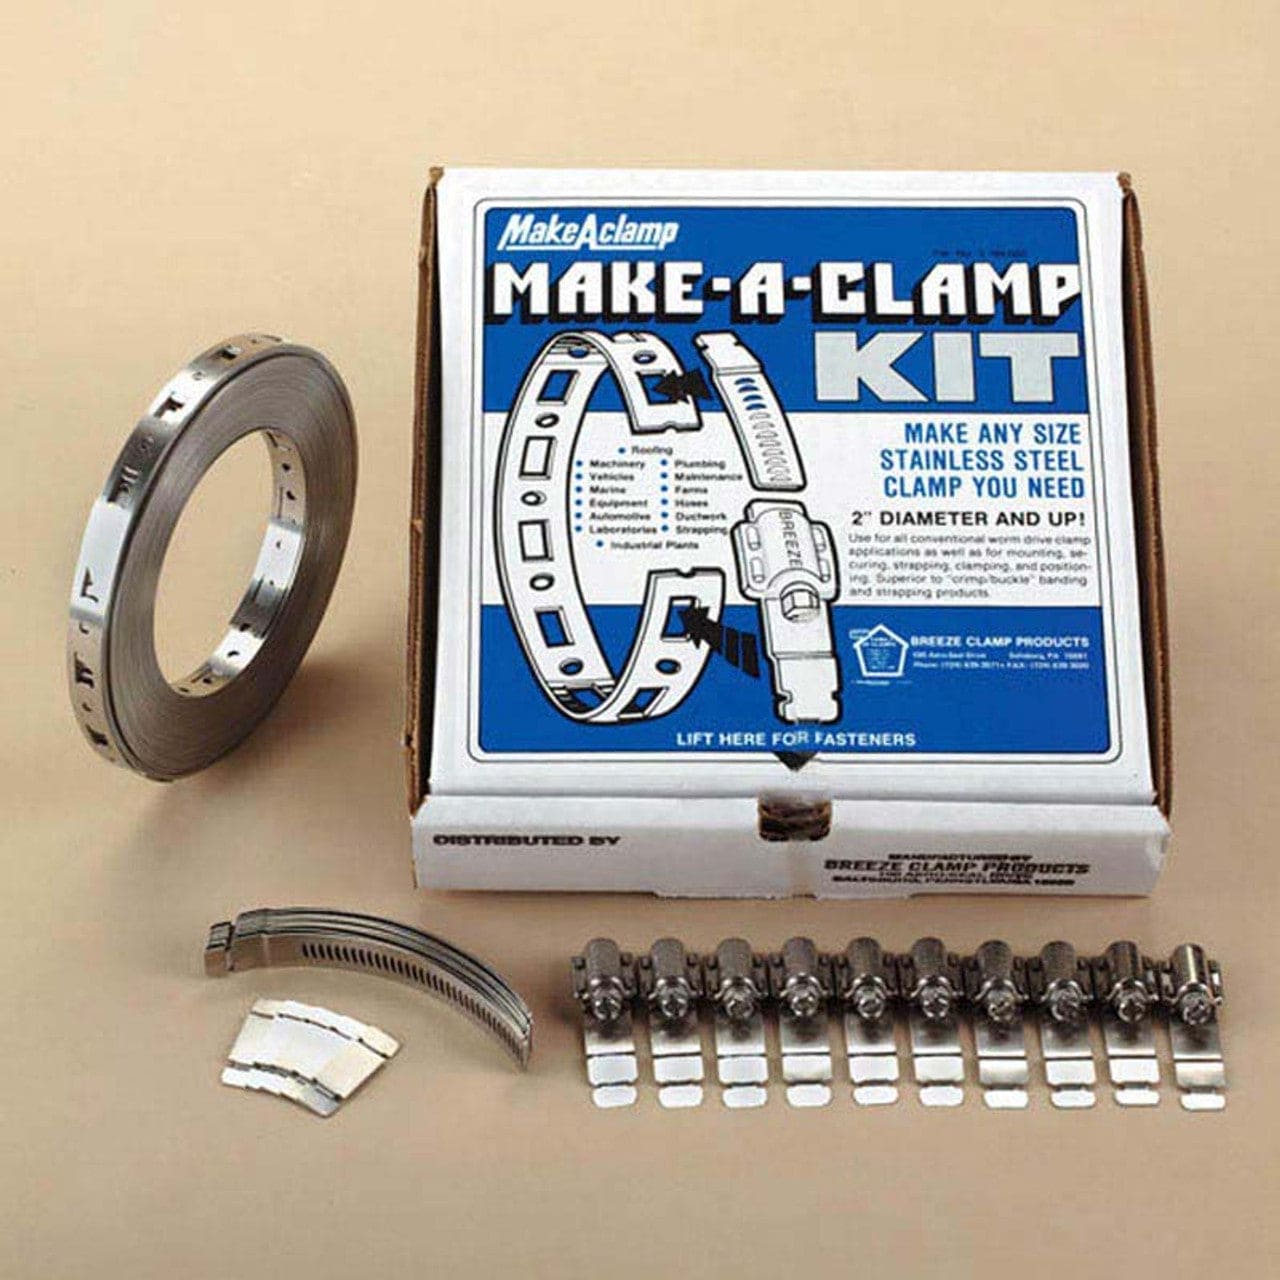 Make-A-Clamp Extra Fasteners Box Of 10 - Chimney Cricket